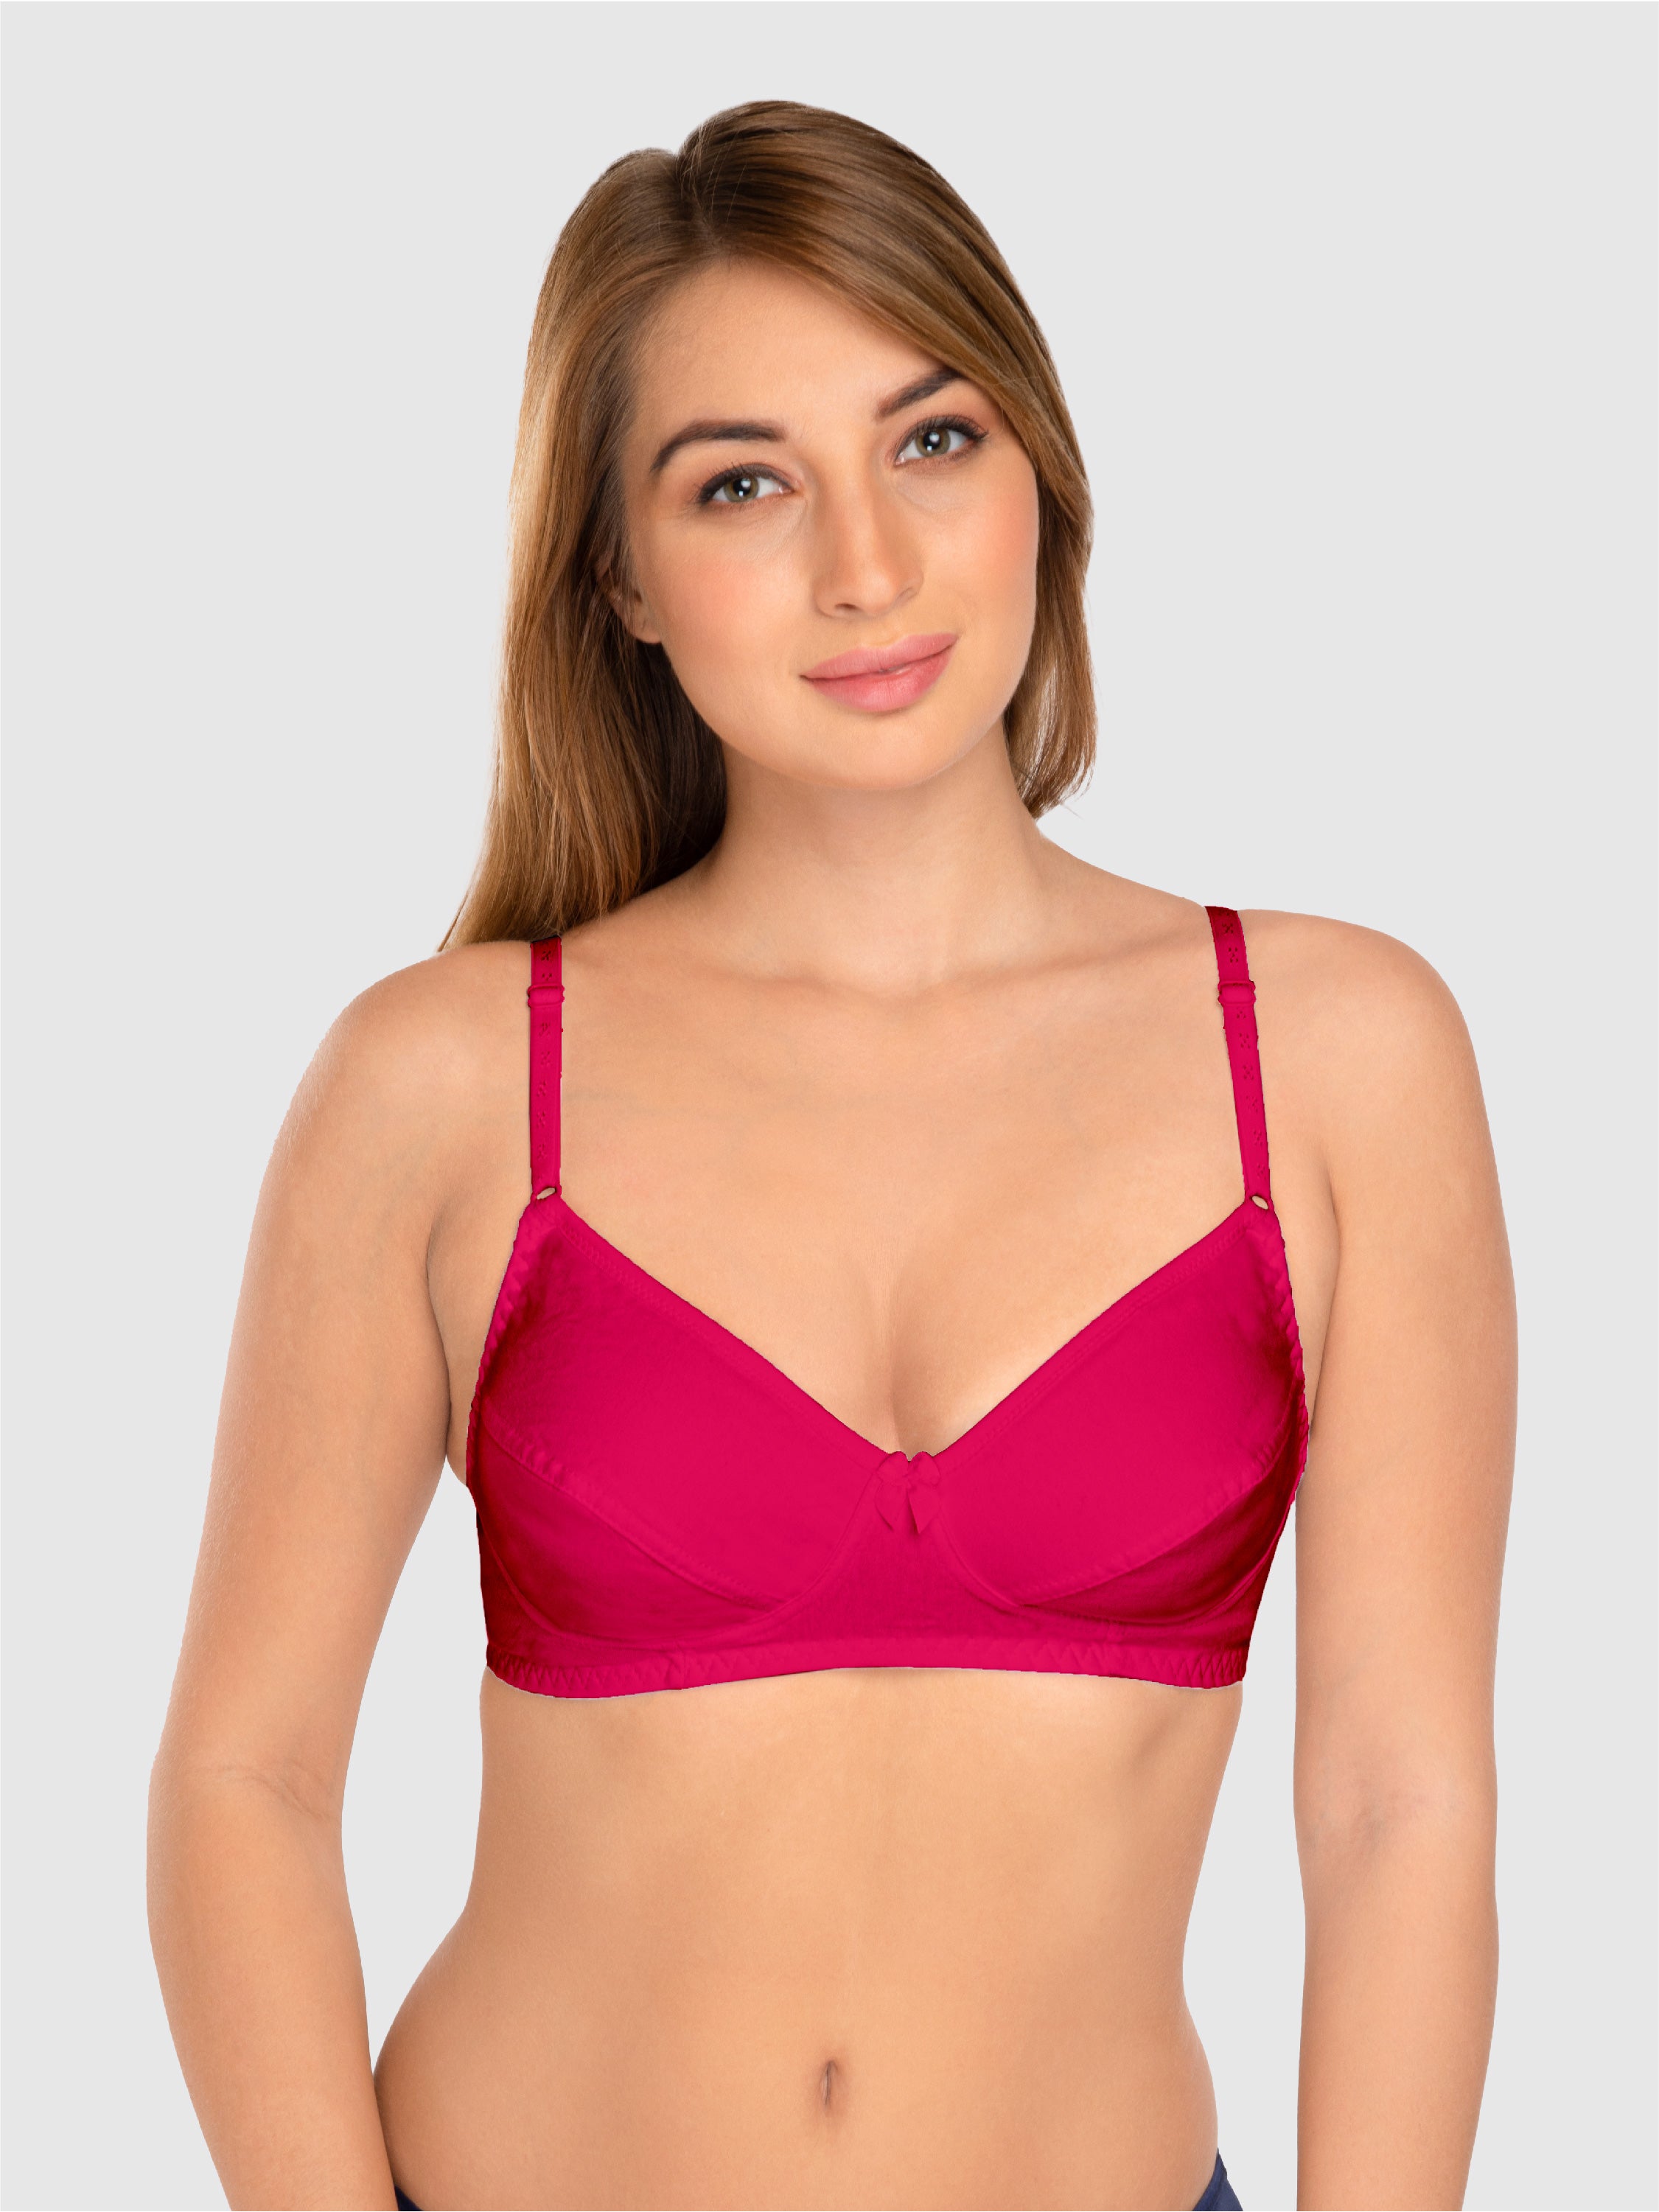 Daisy Dee Pink Non Padded Non Wired Full Coverage Bra NCLBR-R.Pink